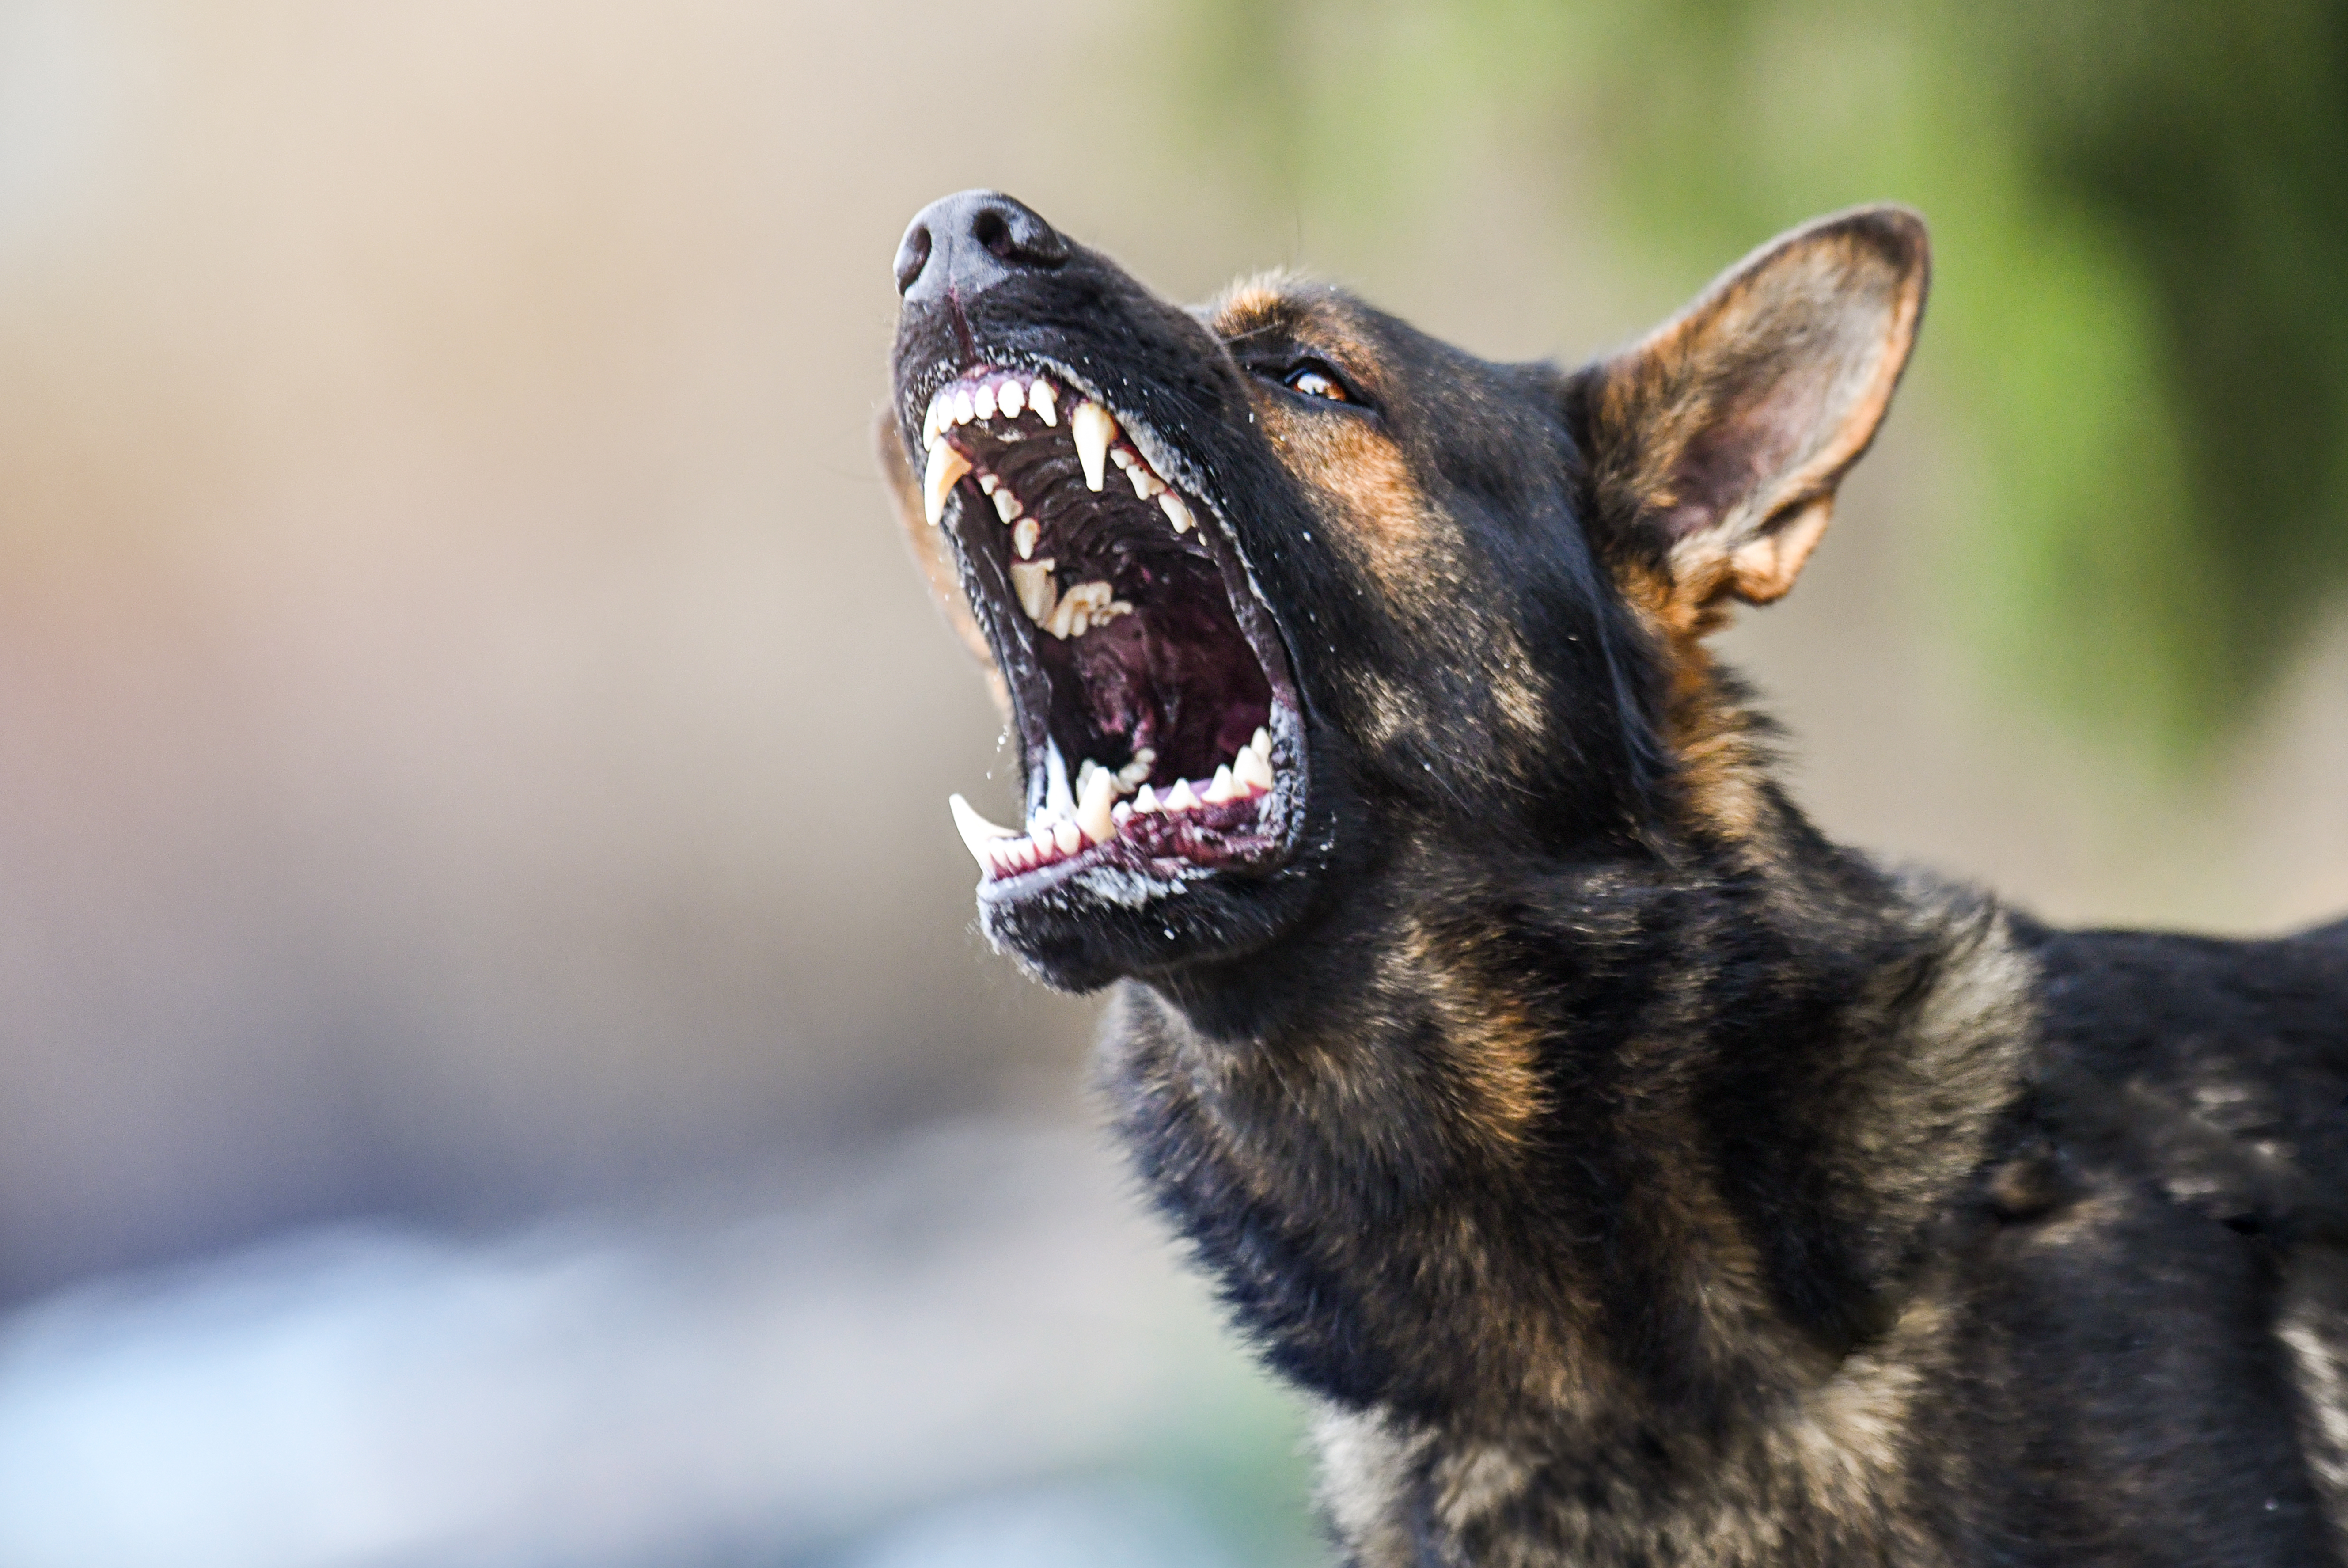 Angry dog | Source: Shutterstock